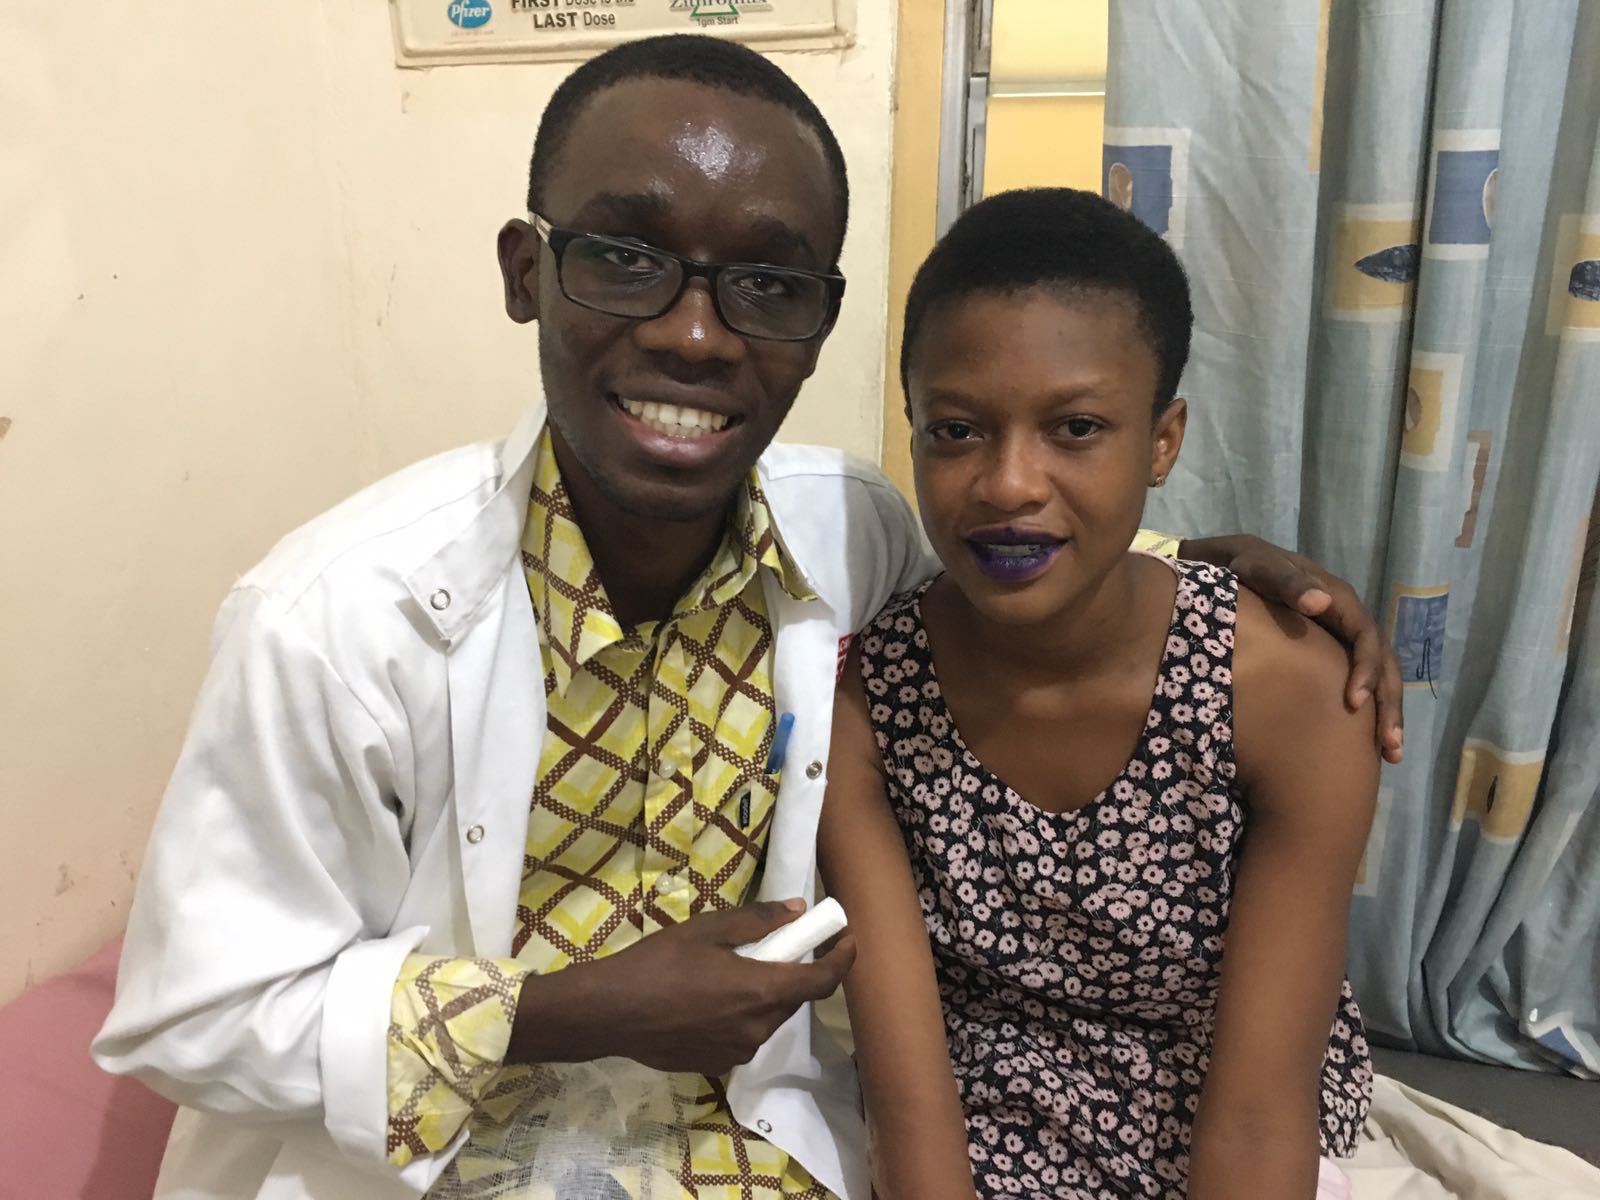 Touro's School of Health Sciences Occupational Therapy program donated several hundred Orfit splints to Ghana this year. Pictured above, Robert Stowa, a hand therapist in Ghana, poses with one of his patients who benefited from a donated splint.